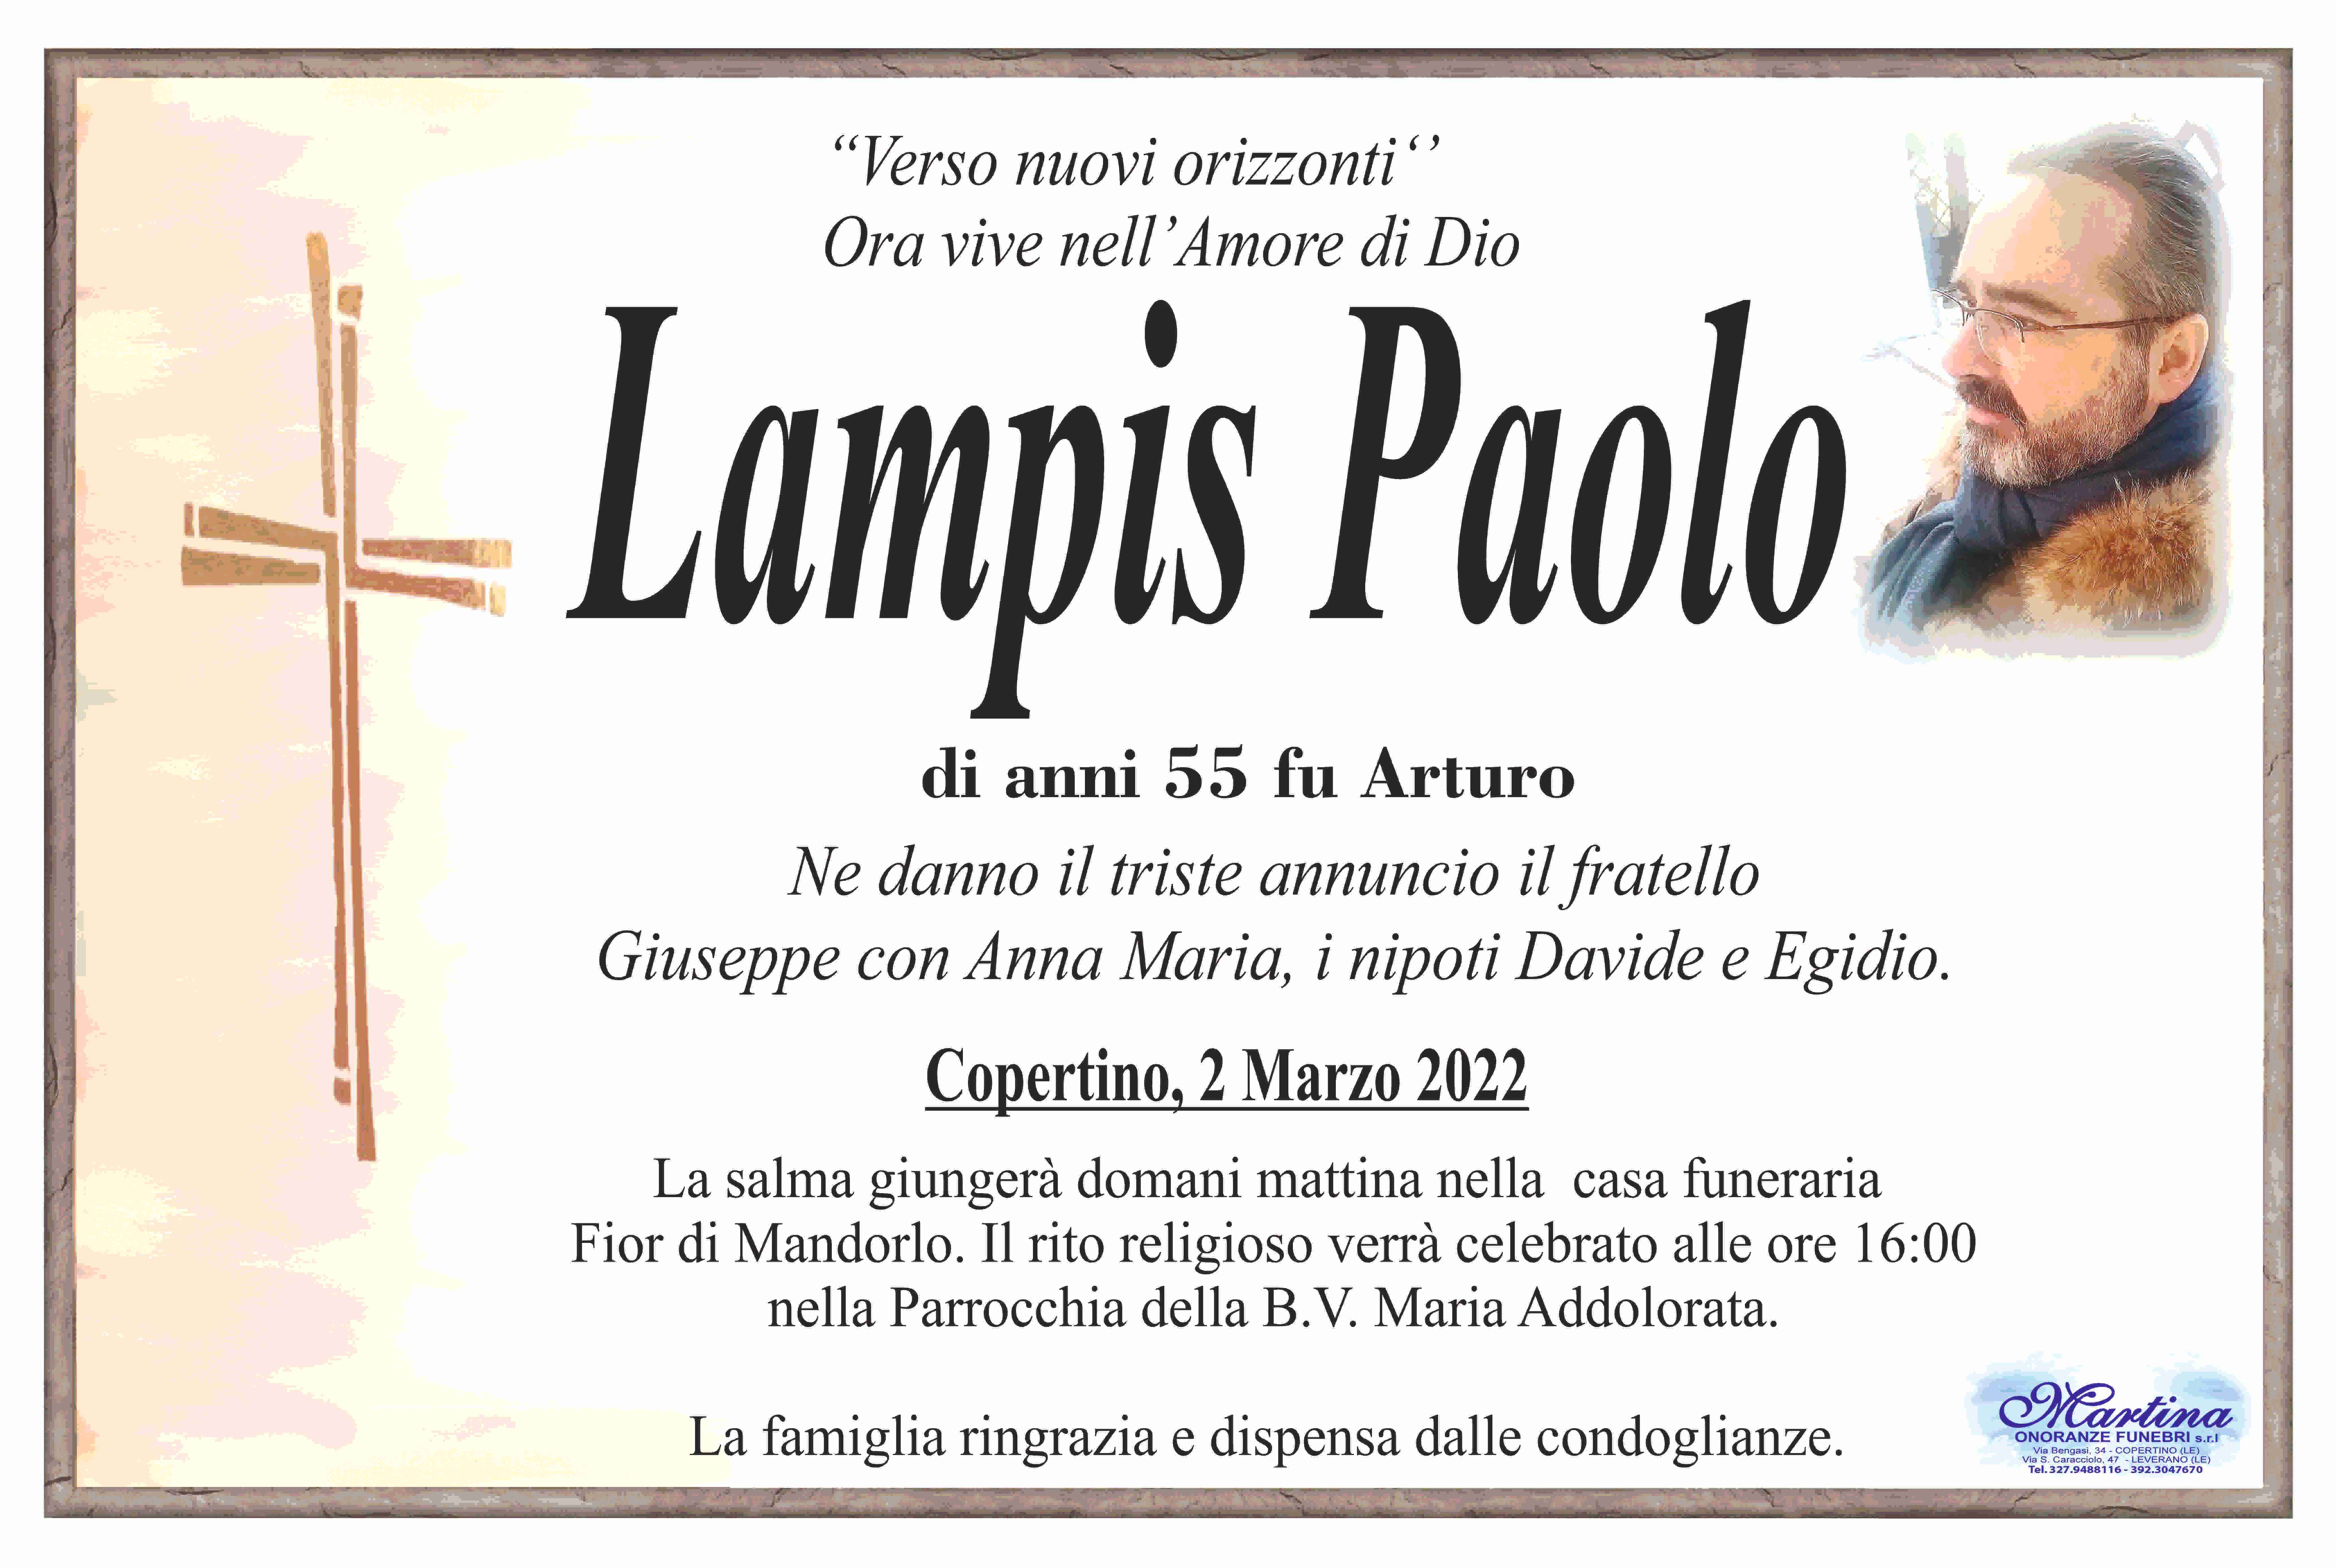 Paolo Lampis